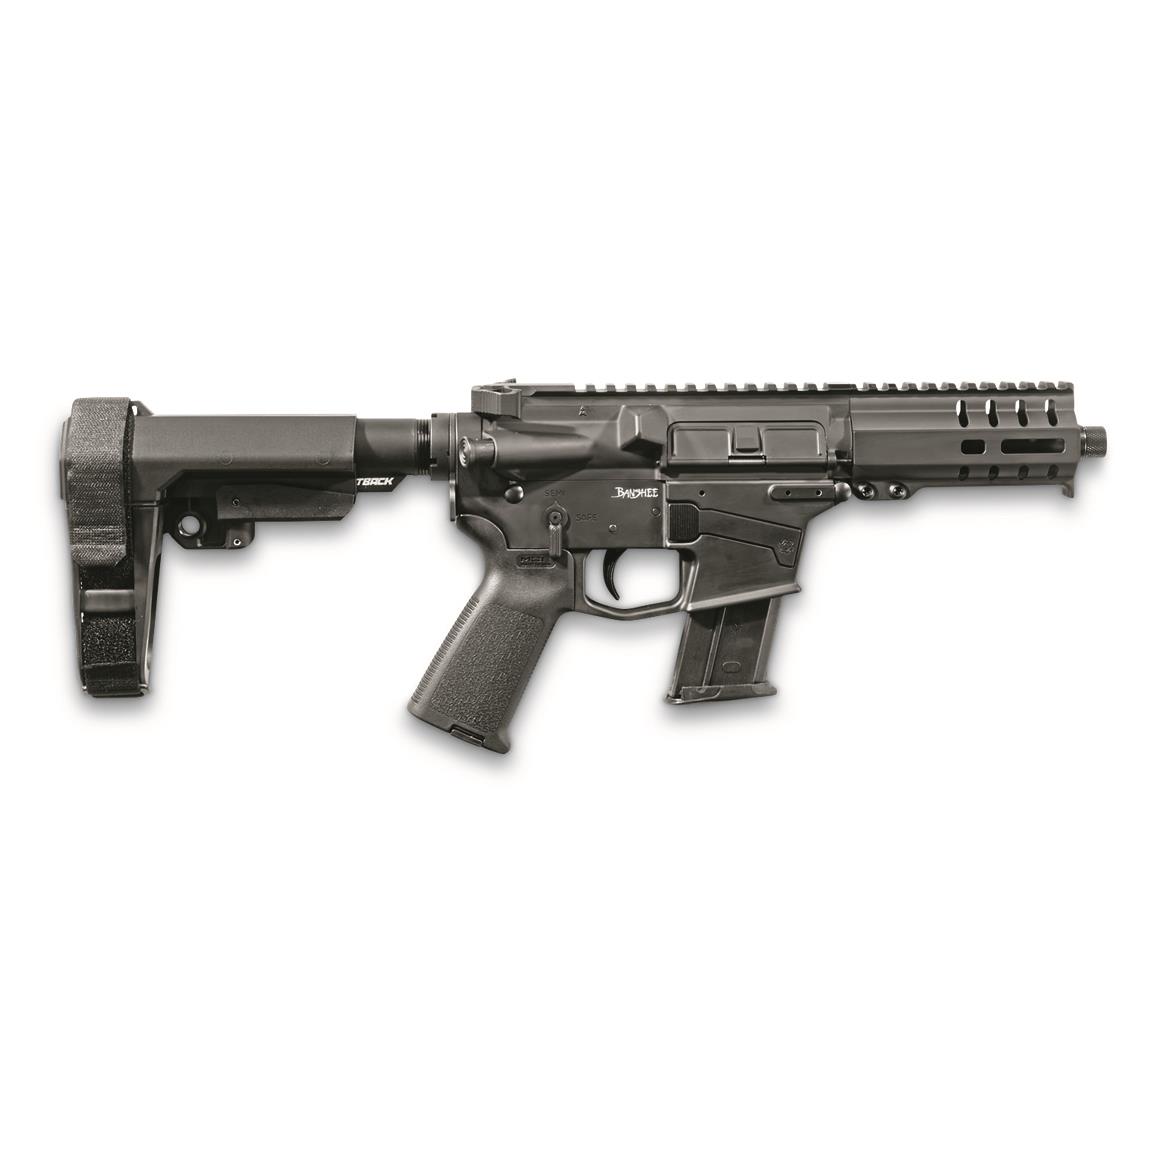 CMMG Banshee 300 Mk57 AR-style Pistol, 5.7x28mm, 5" BBL, Graph., 20+1 Rds., Uses FN Five-SeveN Mags